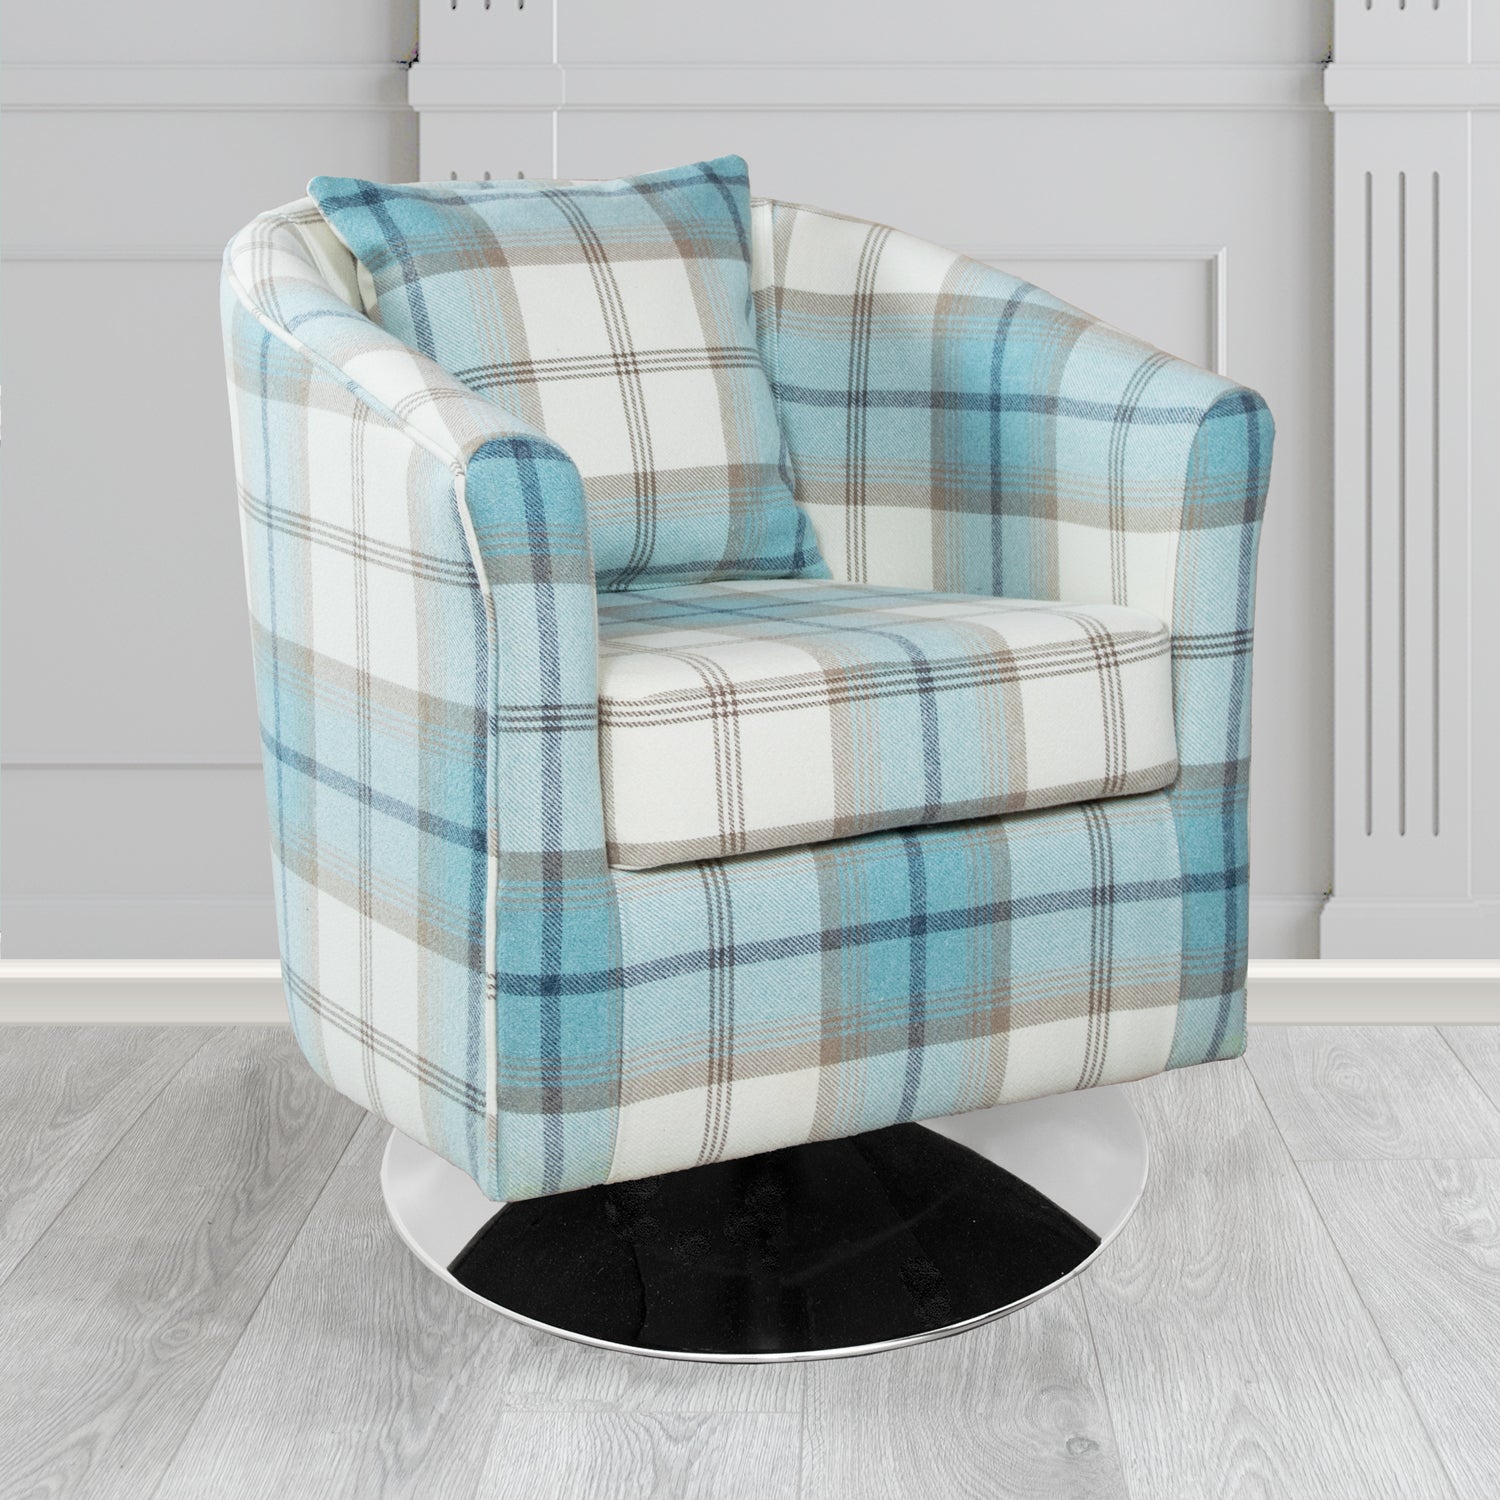 St Tropez Balmoral Sky Check Tartan Fabric Swivel Tub Chair with Scatter Cushion (6627071852586)